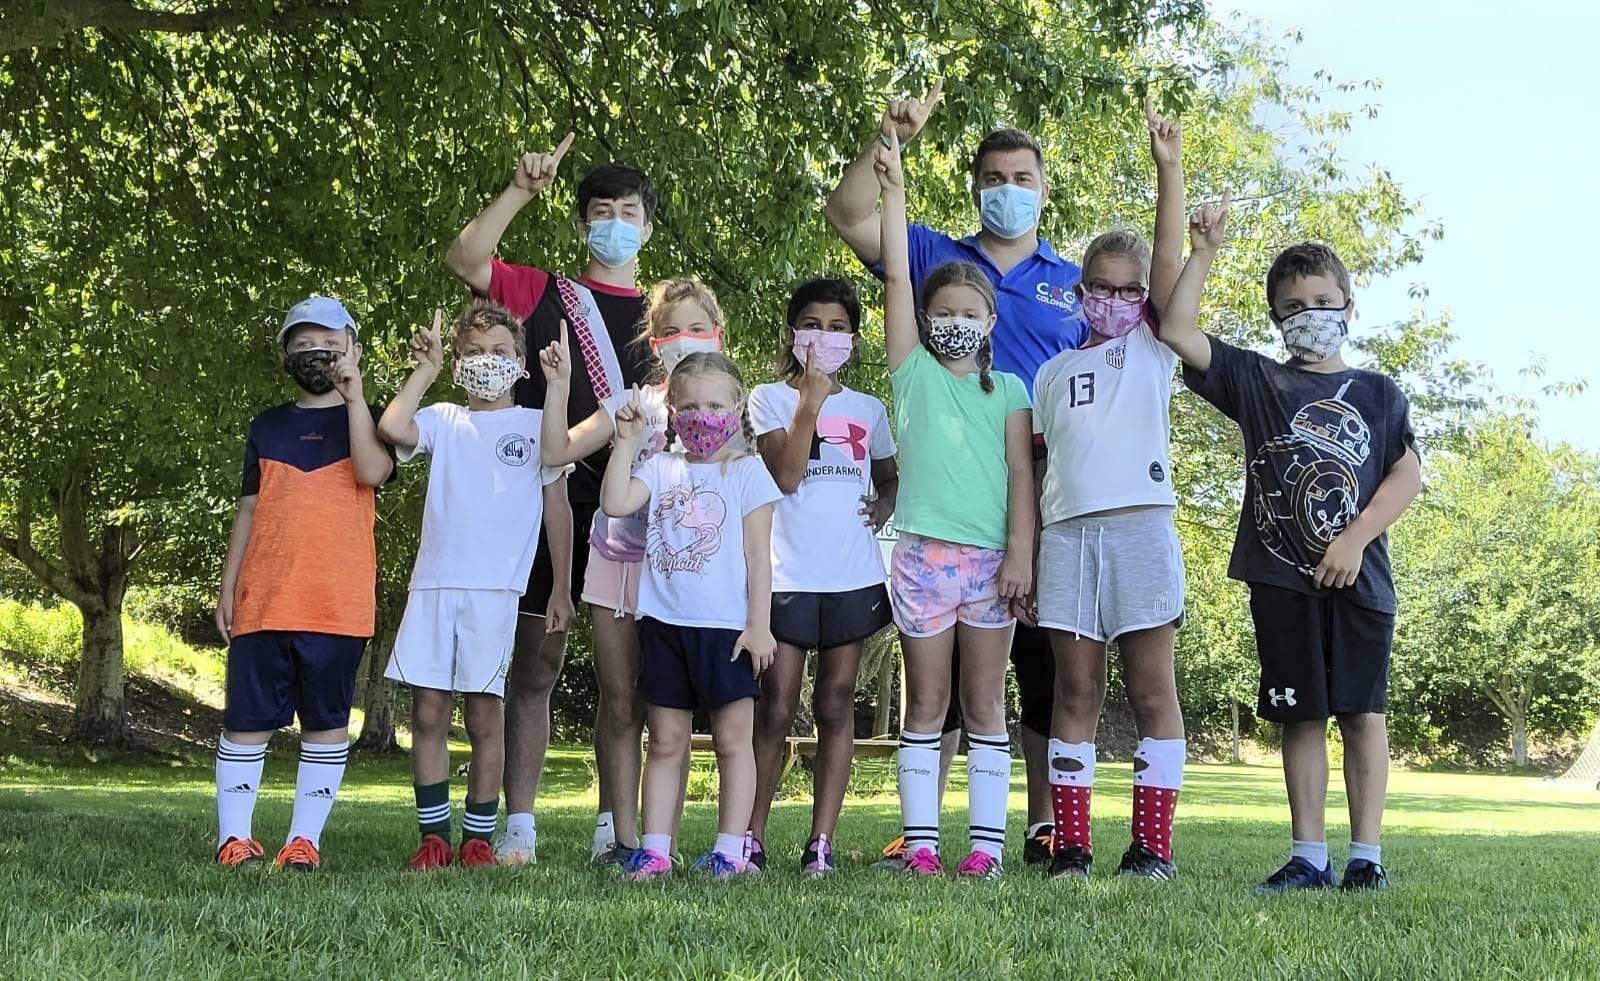 Travel team players who missed out on the spring season because of the pandemic have been thrilled to be playing with teammates again this fall. The Southampton Soccer Club has provided an outlet for many children on the East End who have seen regular high school sports seasons cancelled. 